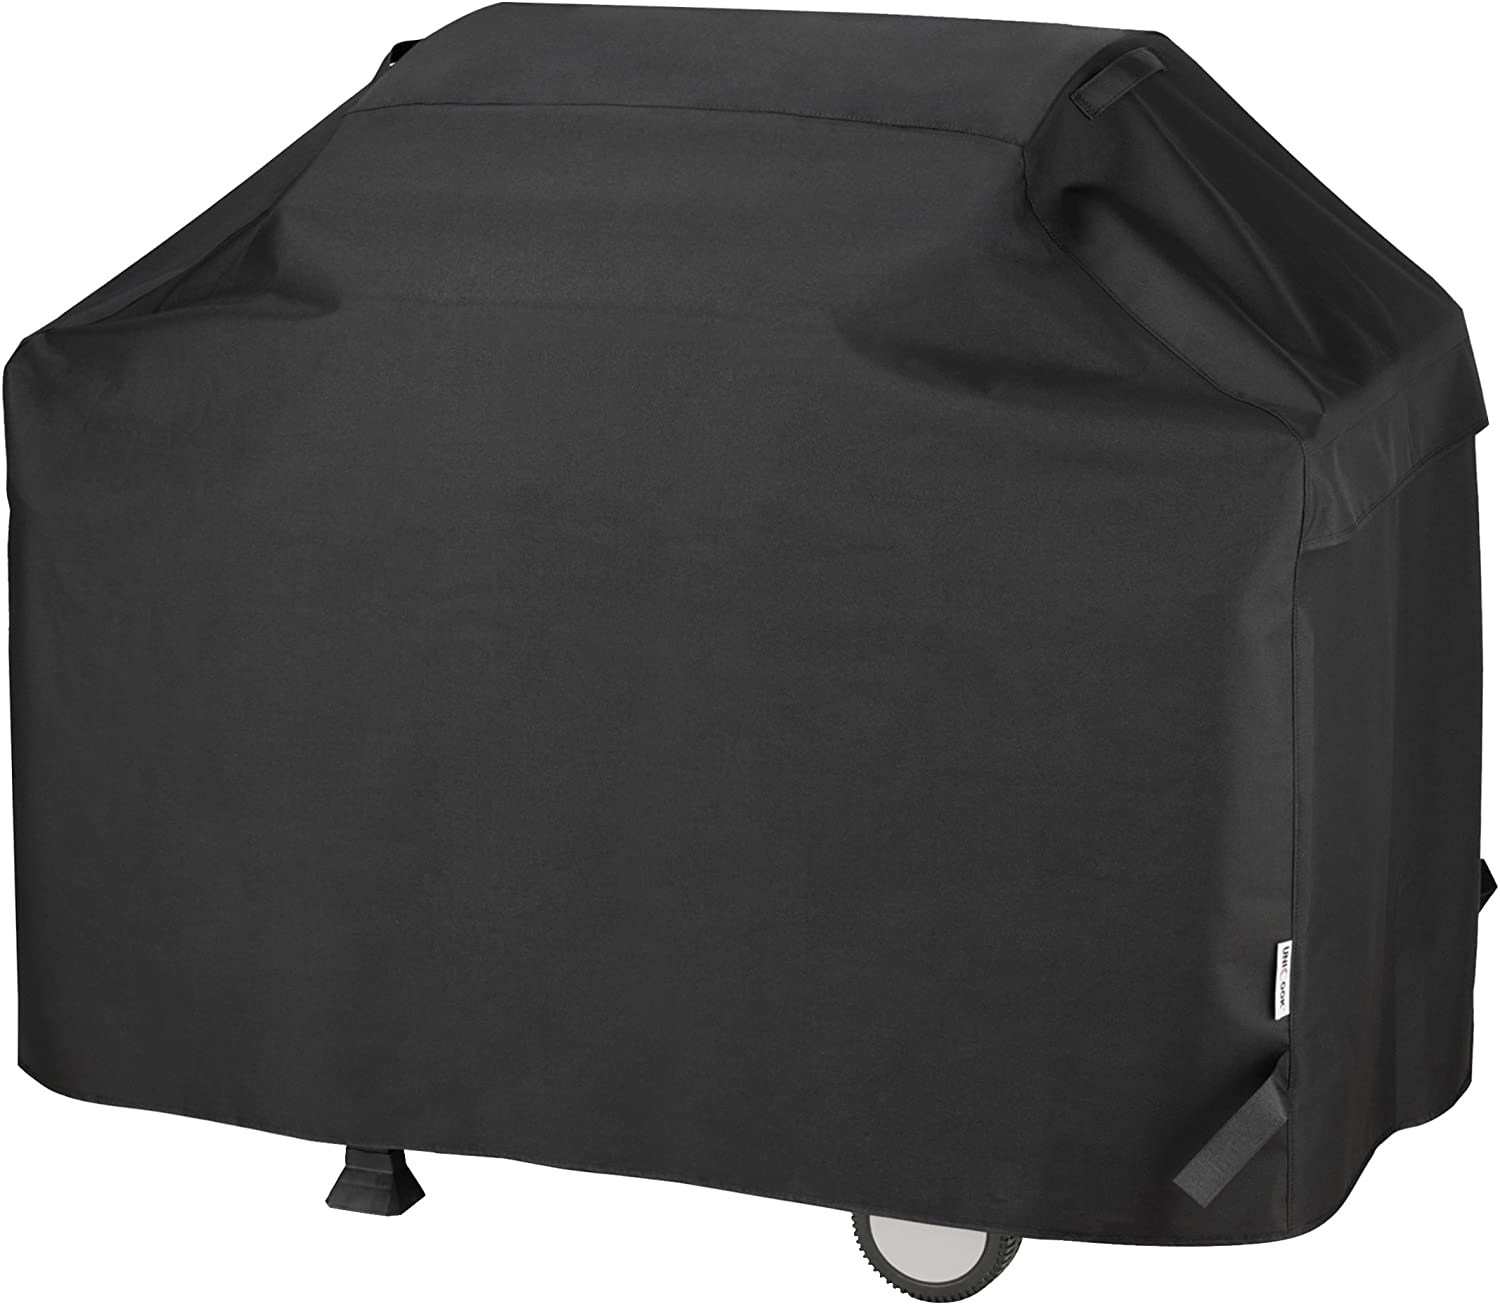 mychoose Barbecue Cover Black Round BBQ Cover 24-Inch Waterproof Dust-proof Anti-UV Kettle BBQ Grill Cover Outdoor Garden Patio Grill Protection,Black,61x72cm